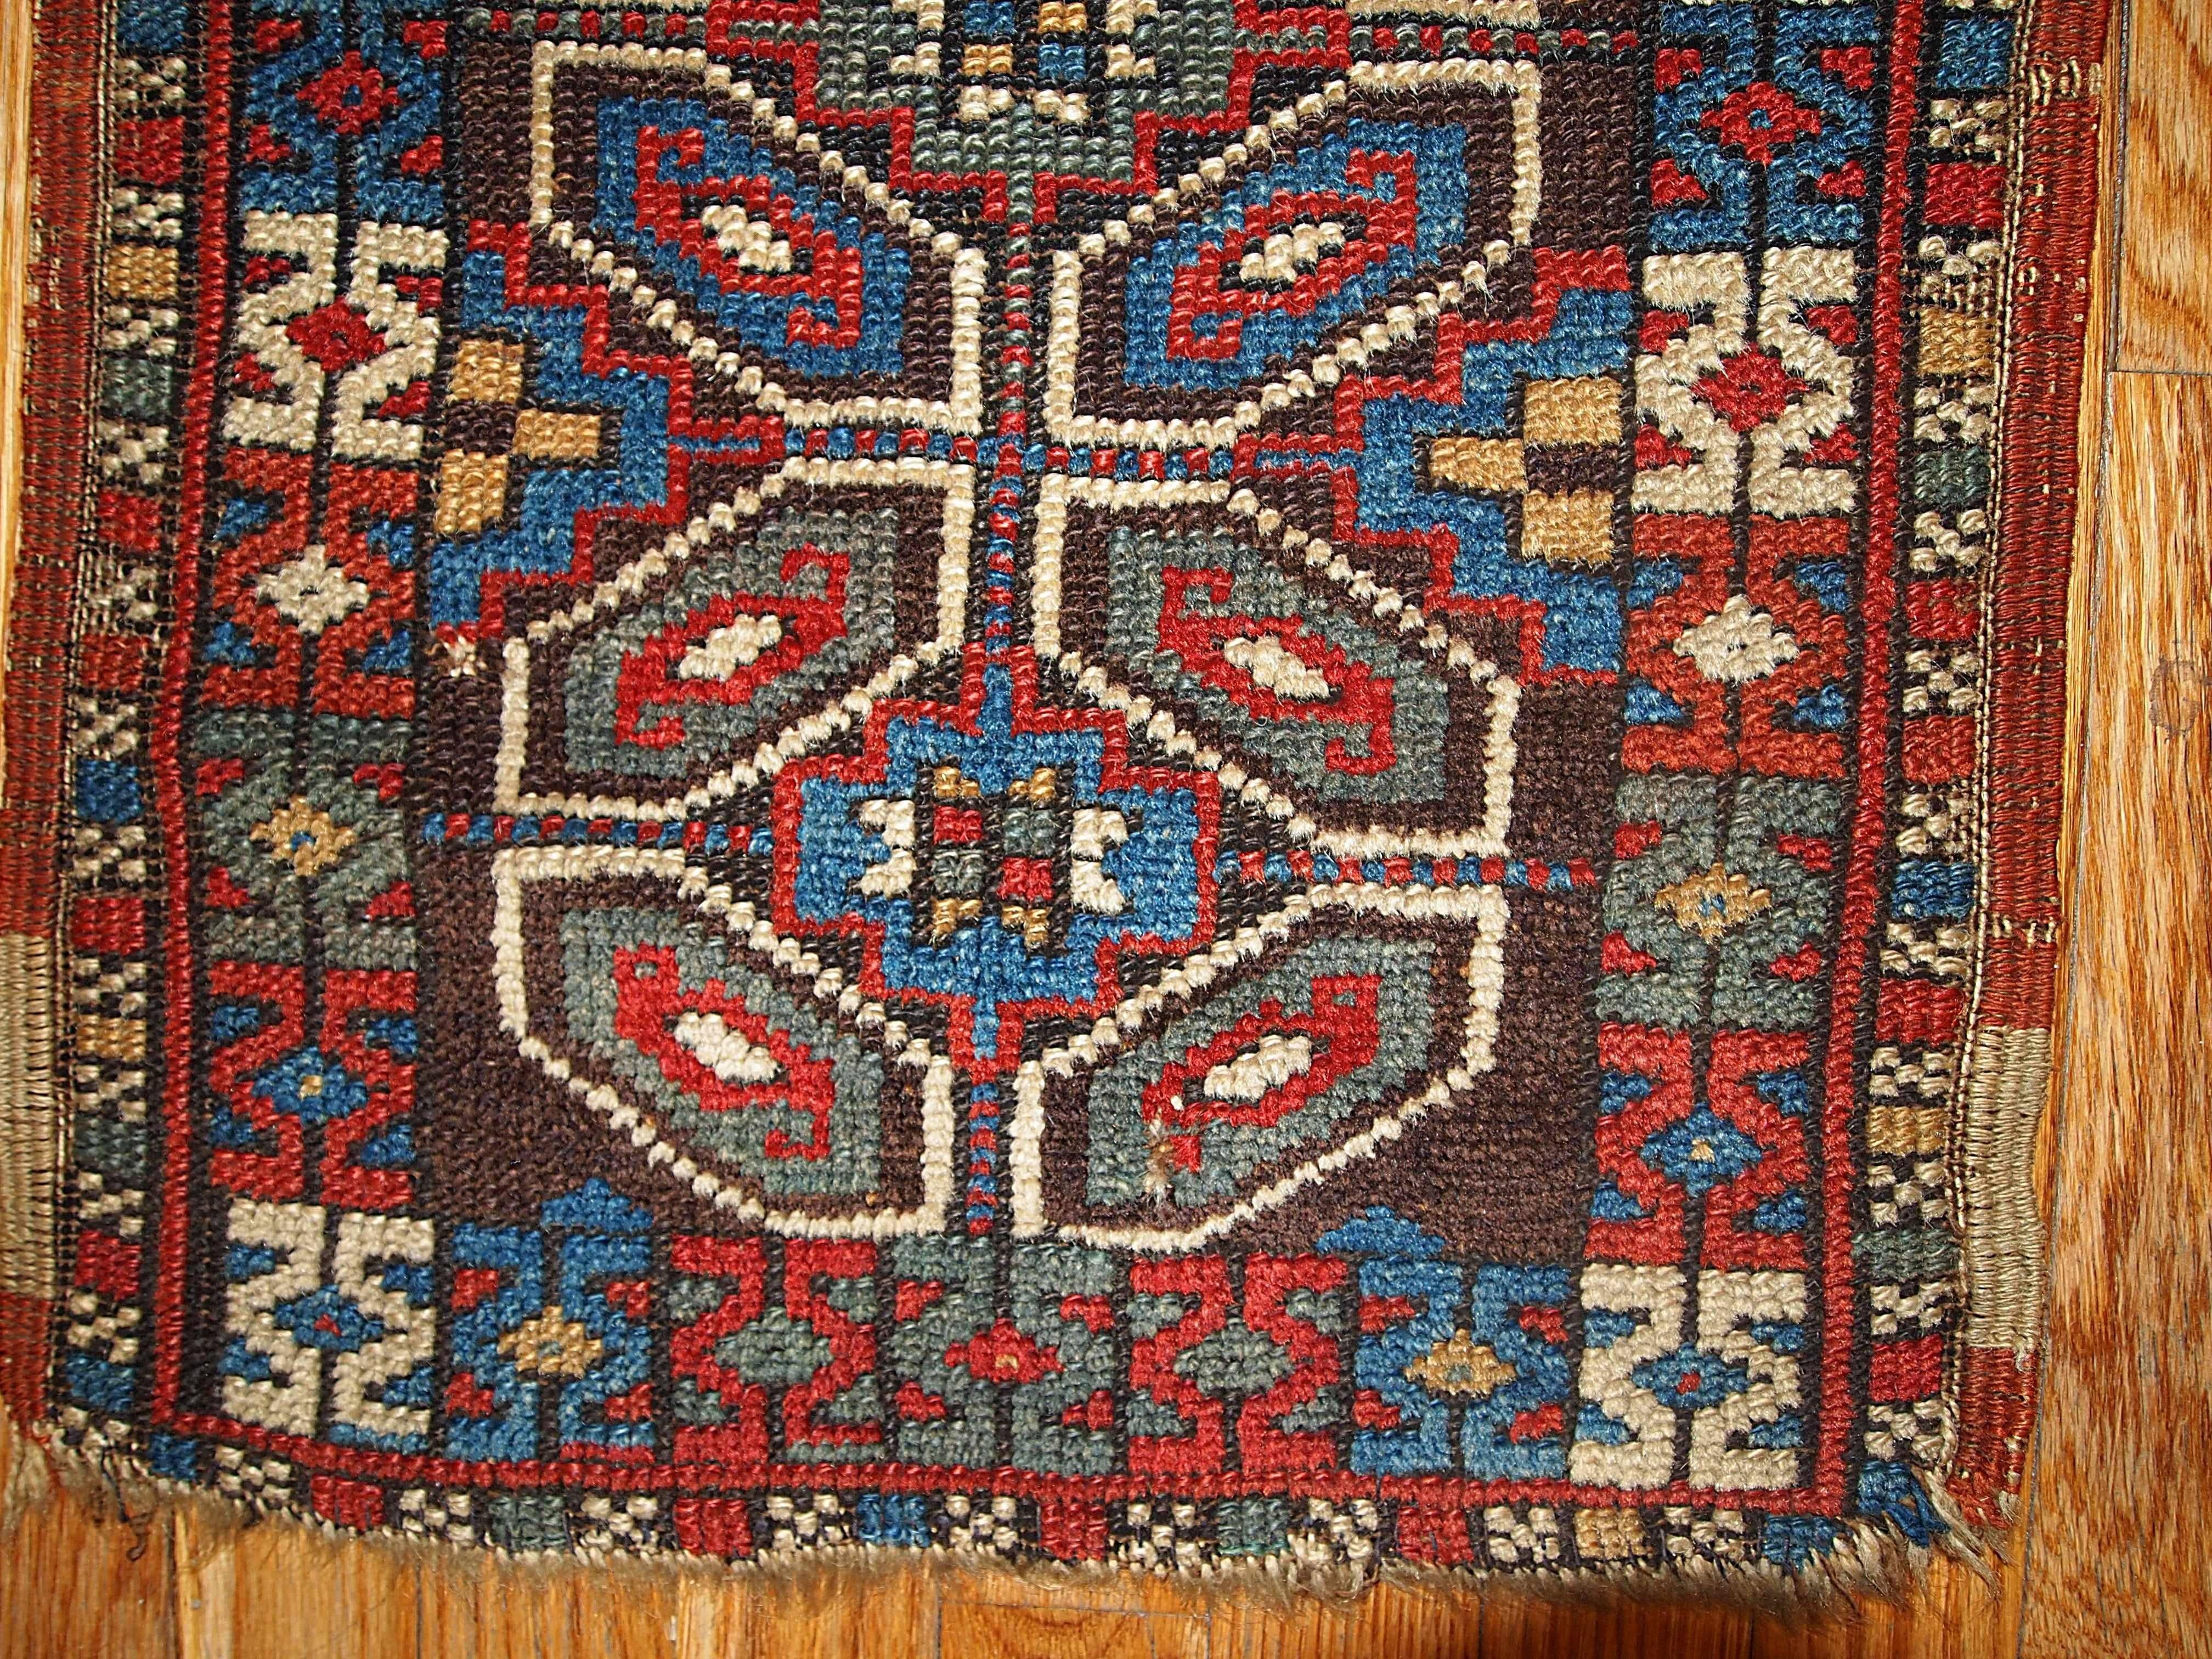 This Turkish Yastik has very rare design of Persian Khamseh rug. Same geometric style and shapes. Even the colors of chocolate brown, blue, beige and red which they used on it are more related to Persian Khamseh type of rugs. But the weave is most